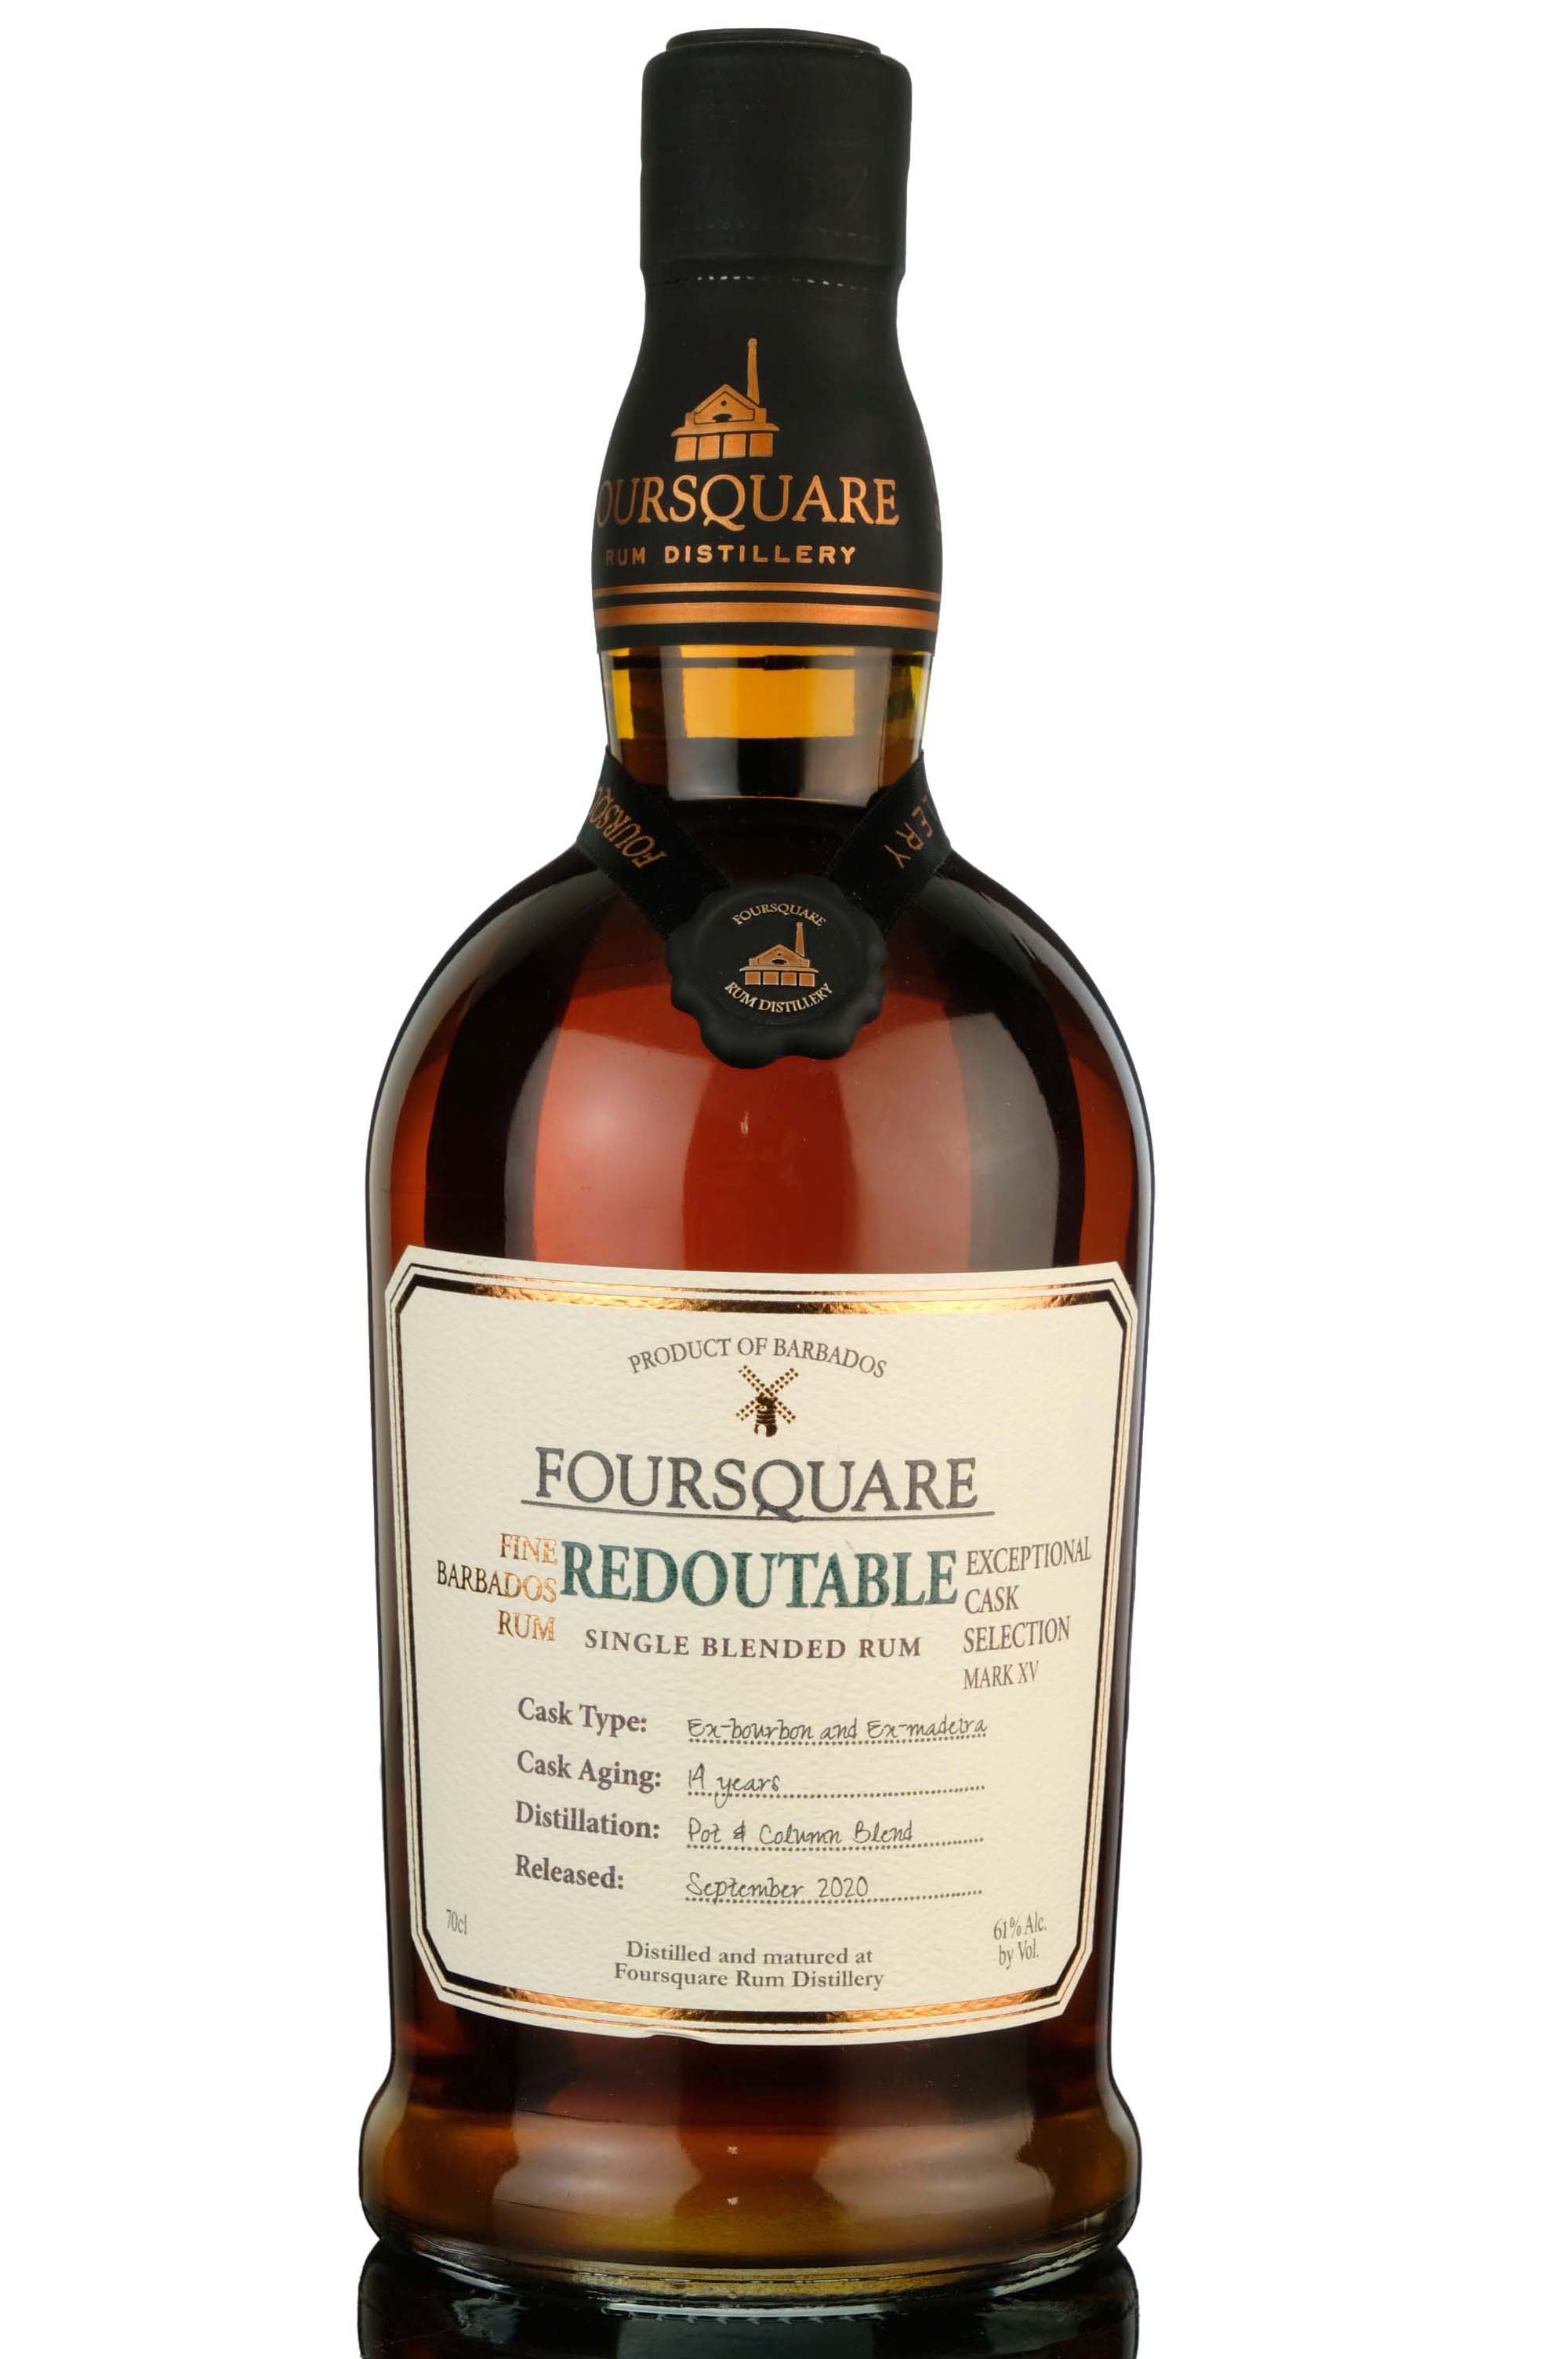 Foursquare 14 Year Old - Exceptional Cask Selection - Redoutable - 2020 Release